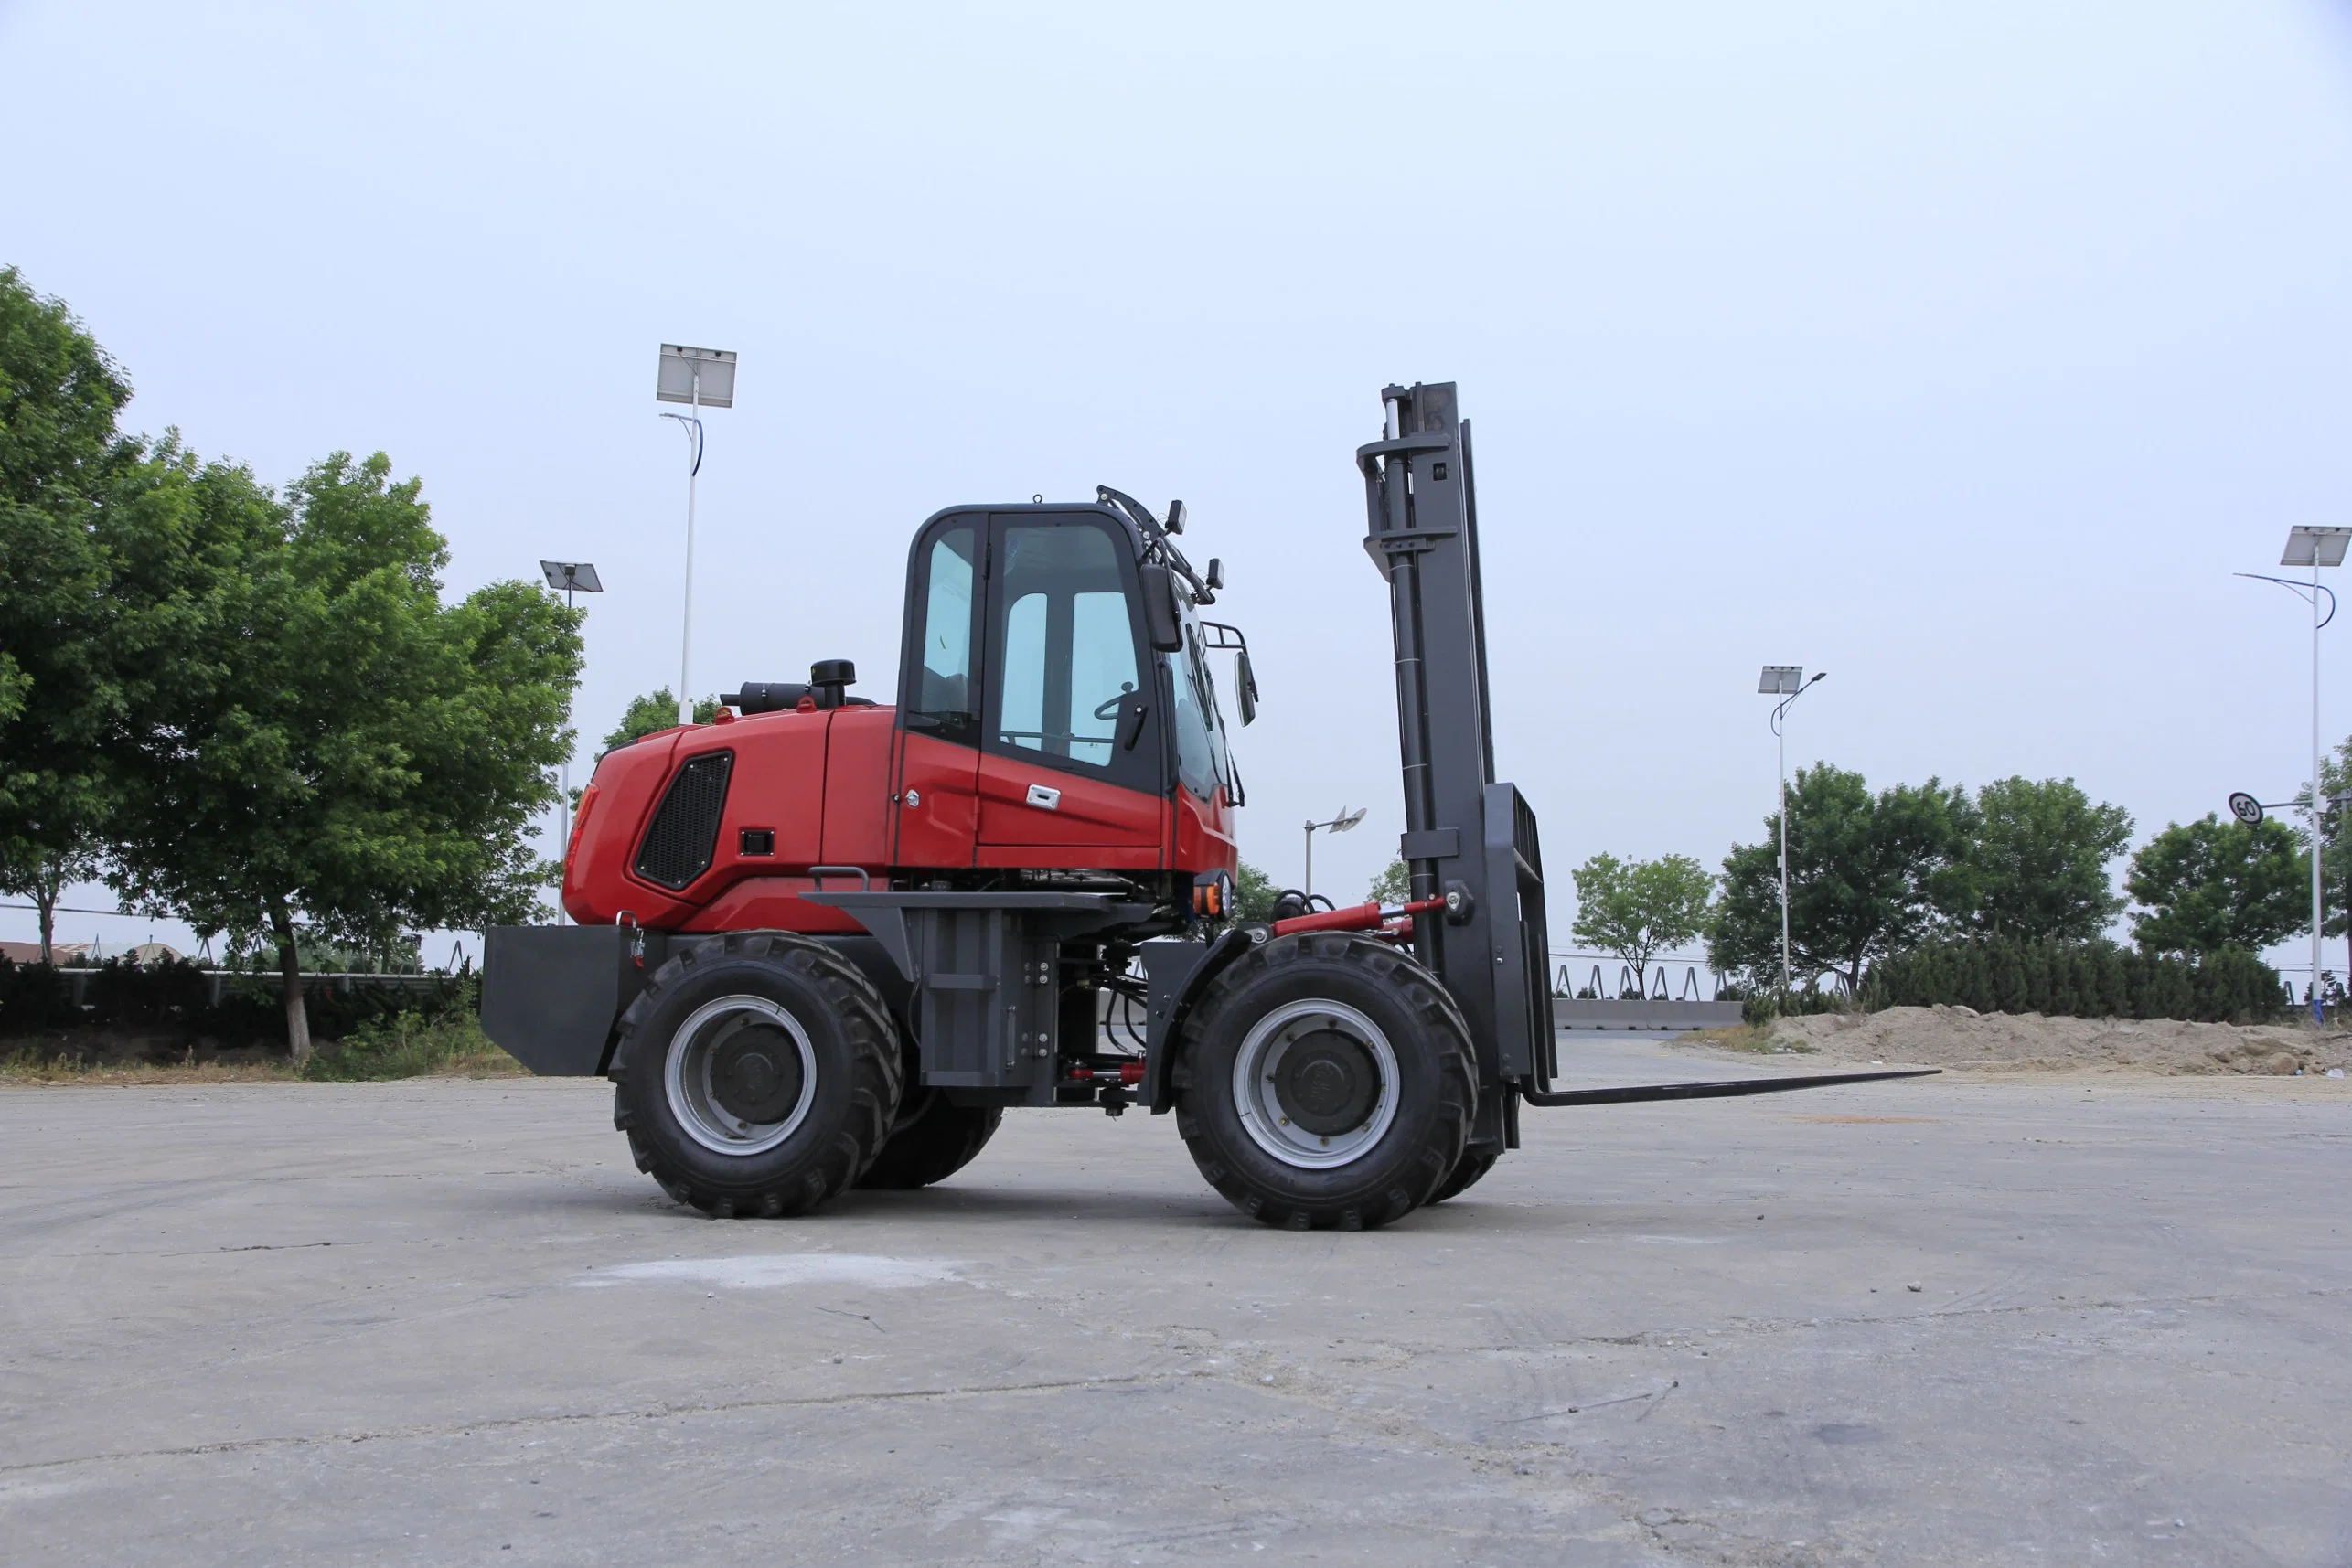 Original Factory Original Package 3.5 Ton Rough All-Terrain Forklift off Road Forklift with Best Price Small off Road Forklift